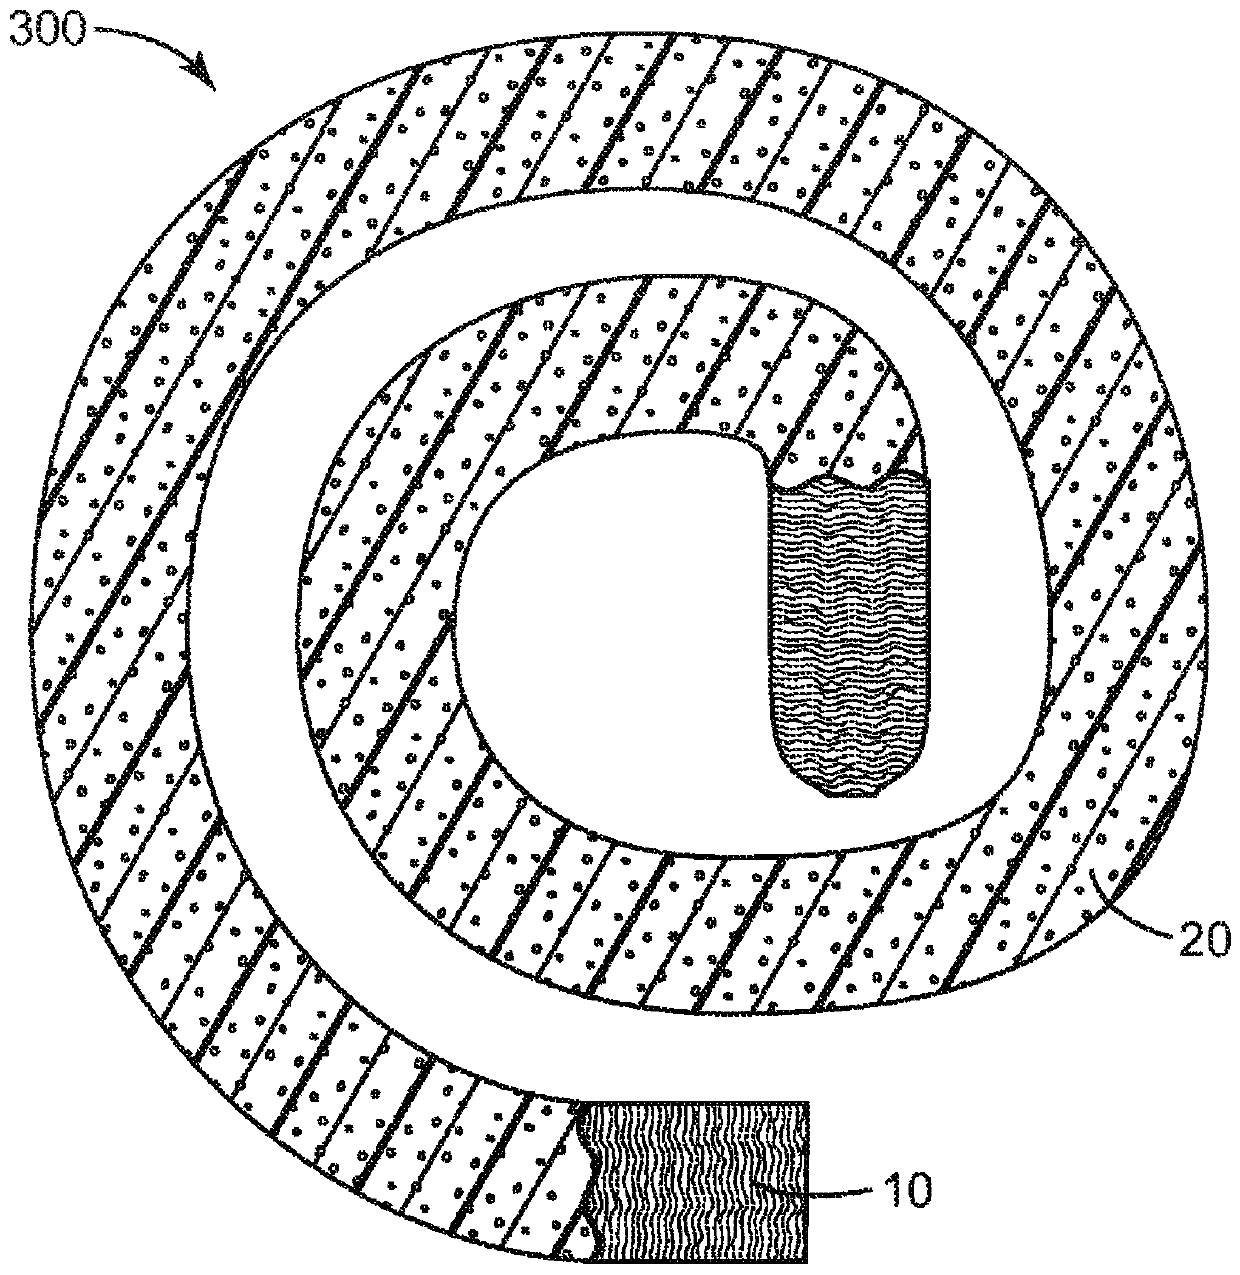 Articles and methods for negative pressure wound therapy